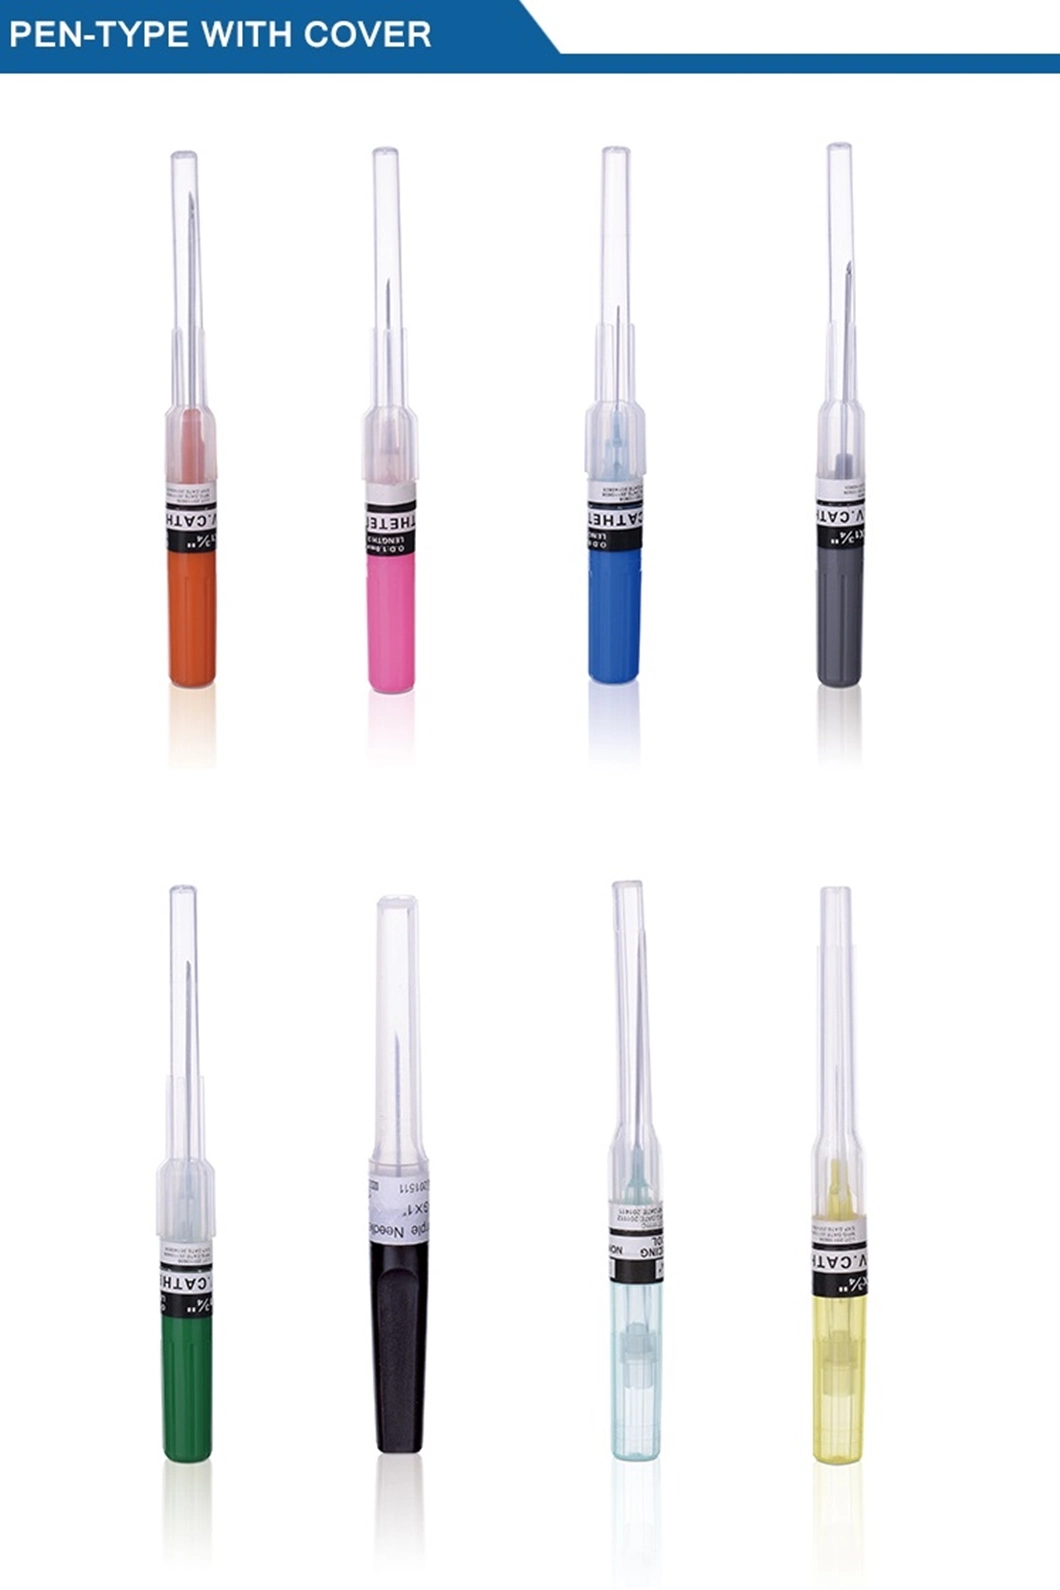 Medical Pen-Like All Size Types of IV Cannula with Wing